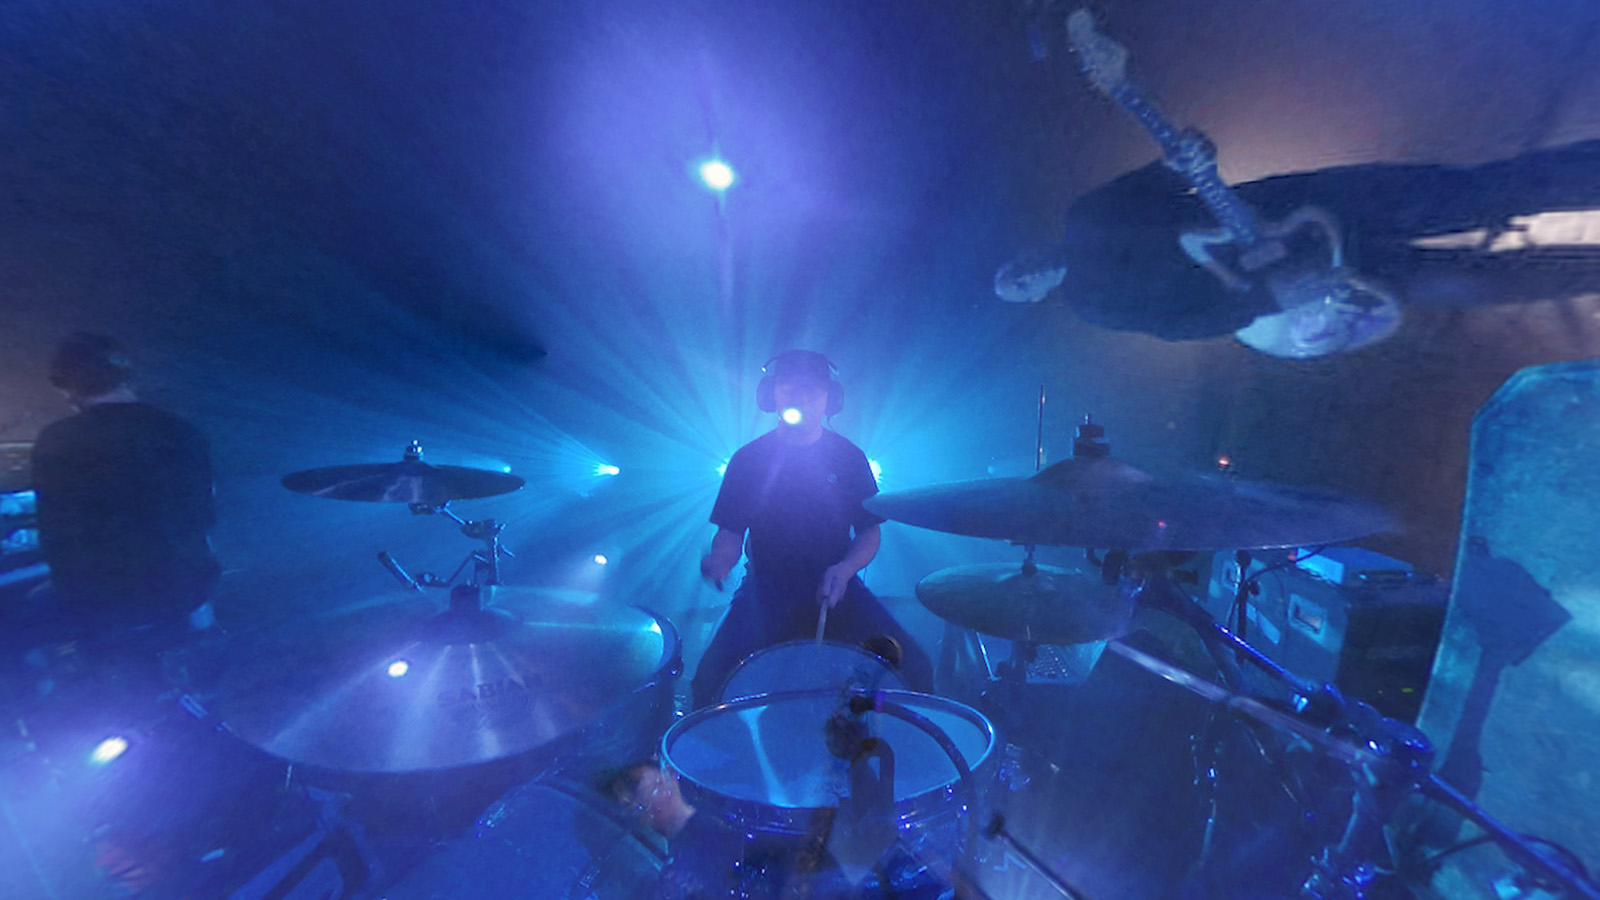 Still from Mogwai: IF THE STARS HAD A SOUND. Drummer Martin Bulloch with his kit during a performance. He is lit from behind and surround by vibrant blue light.